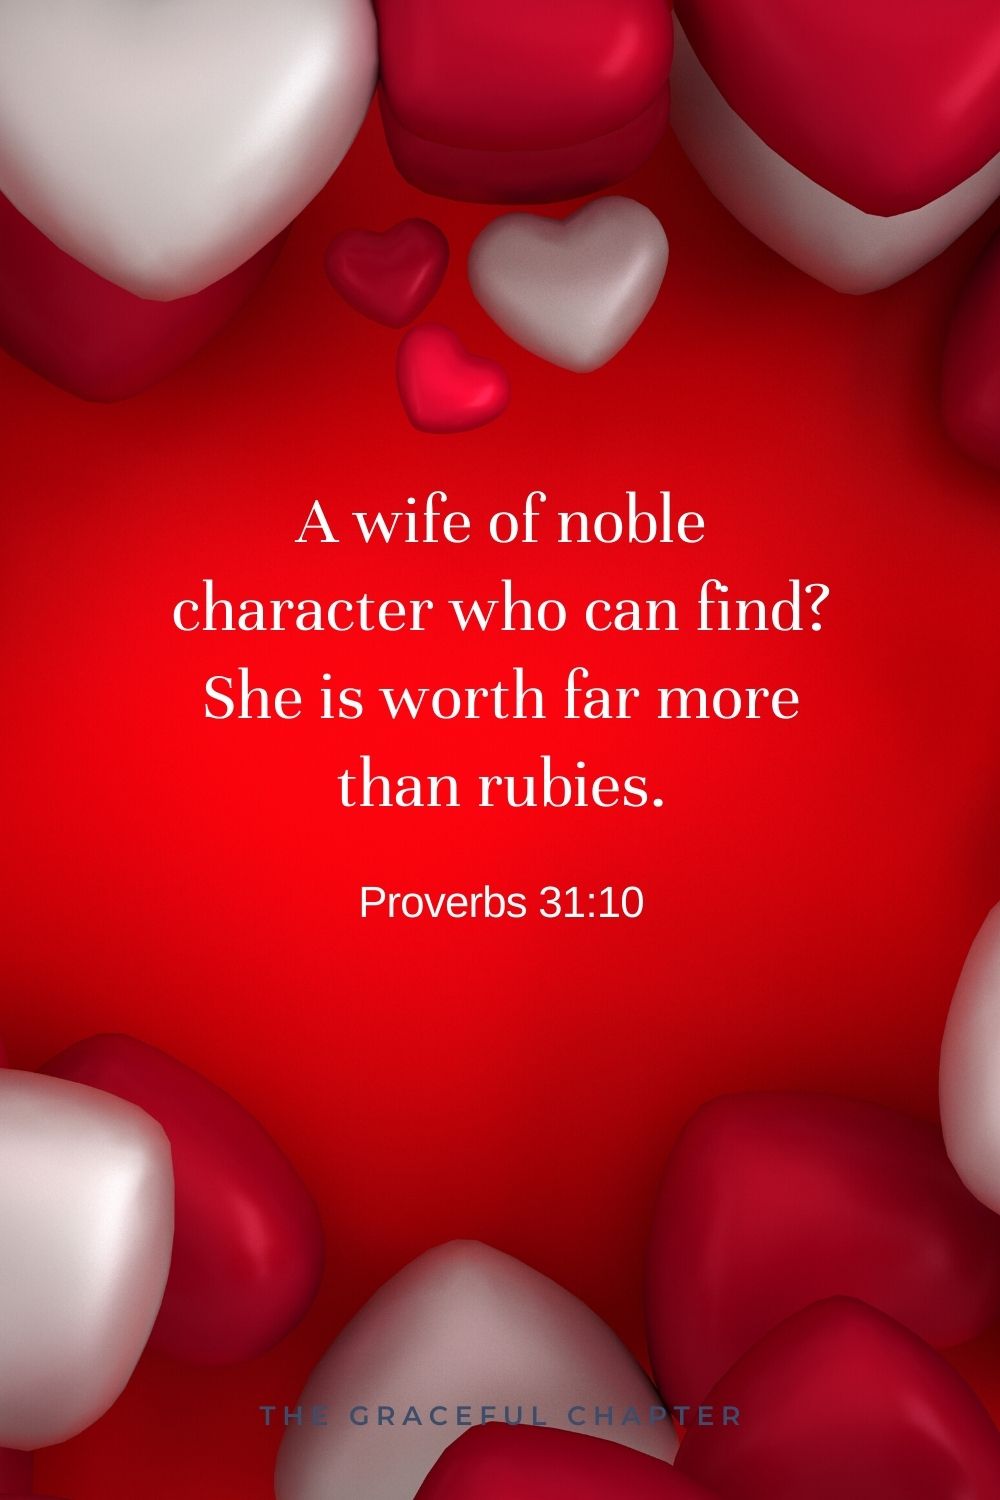 A wife of noble character who can find? She is worth far more than rubies. Proverbs 31:10